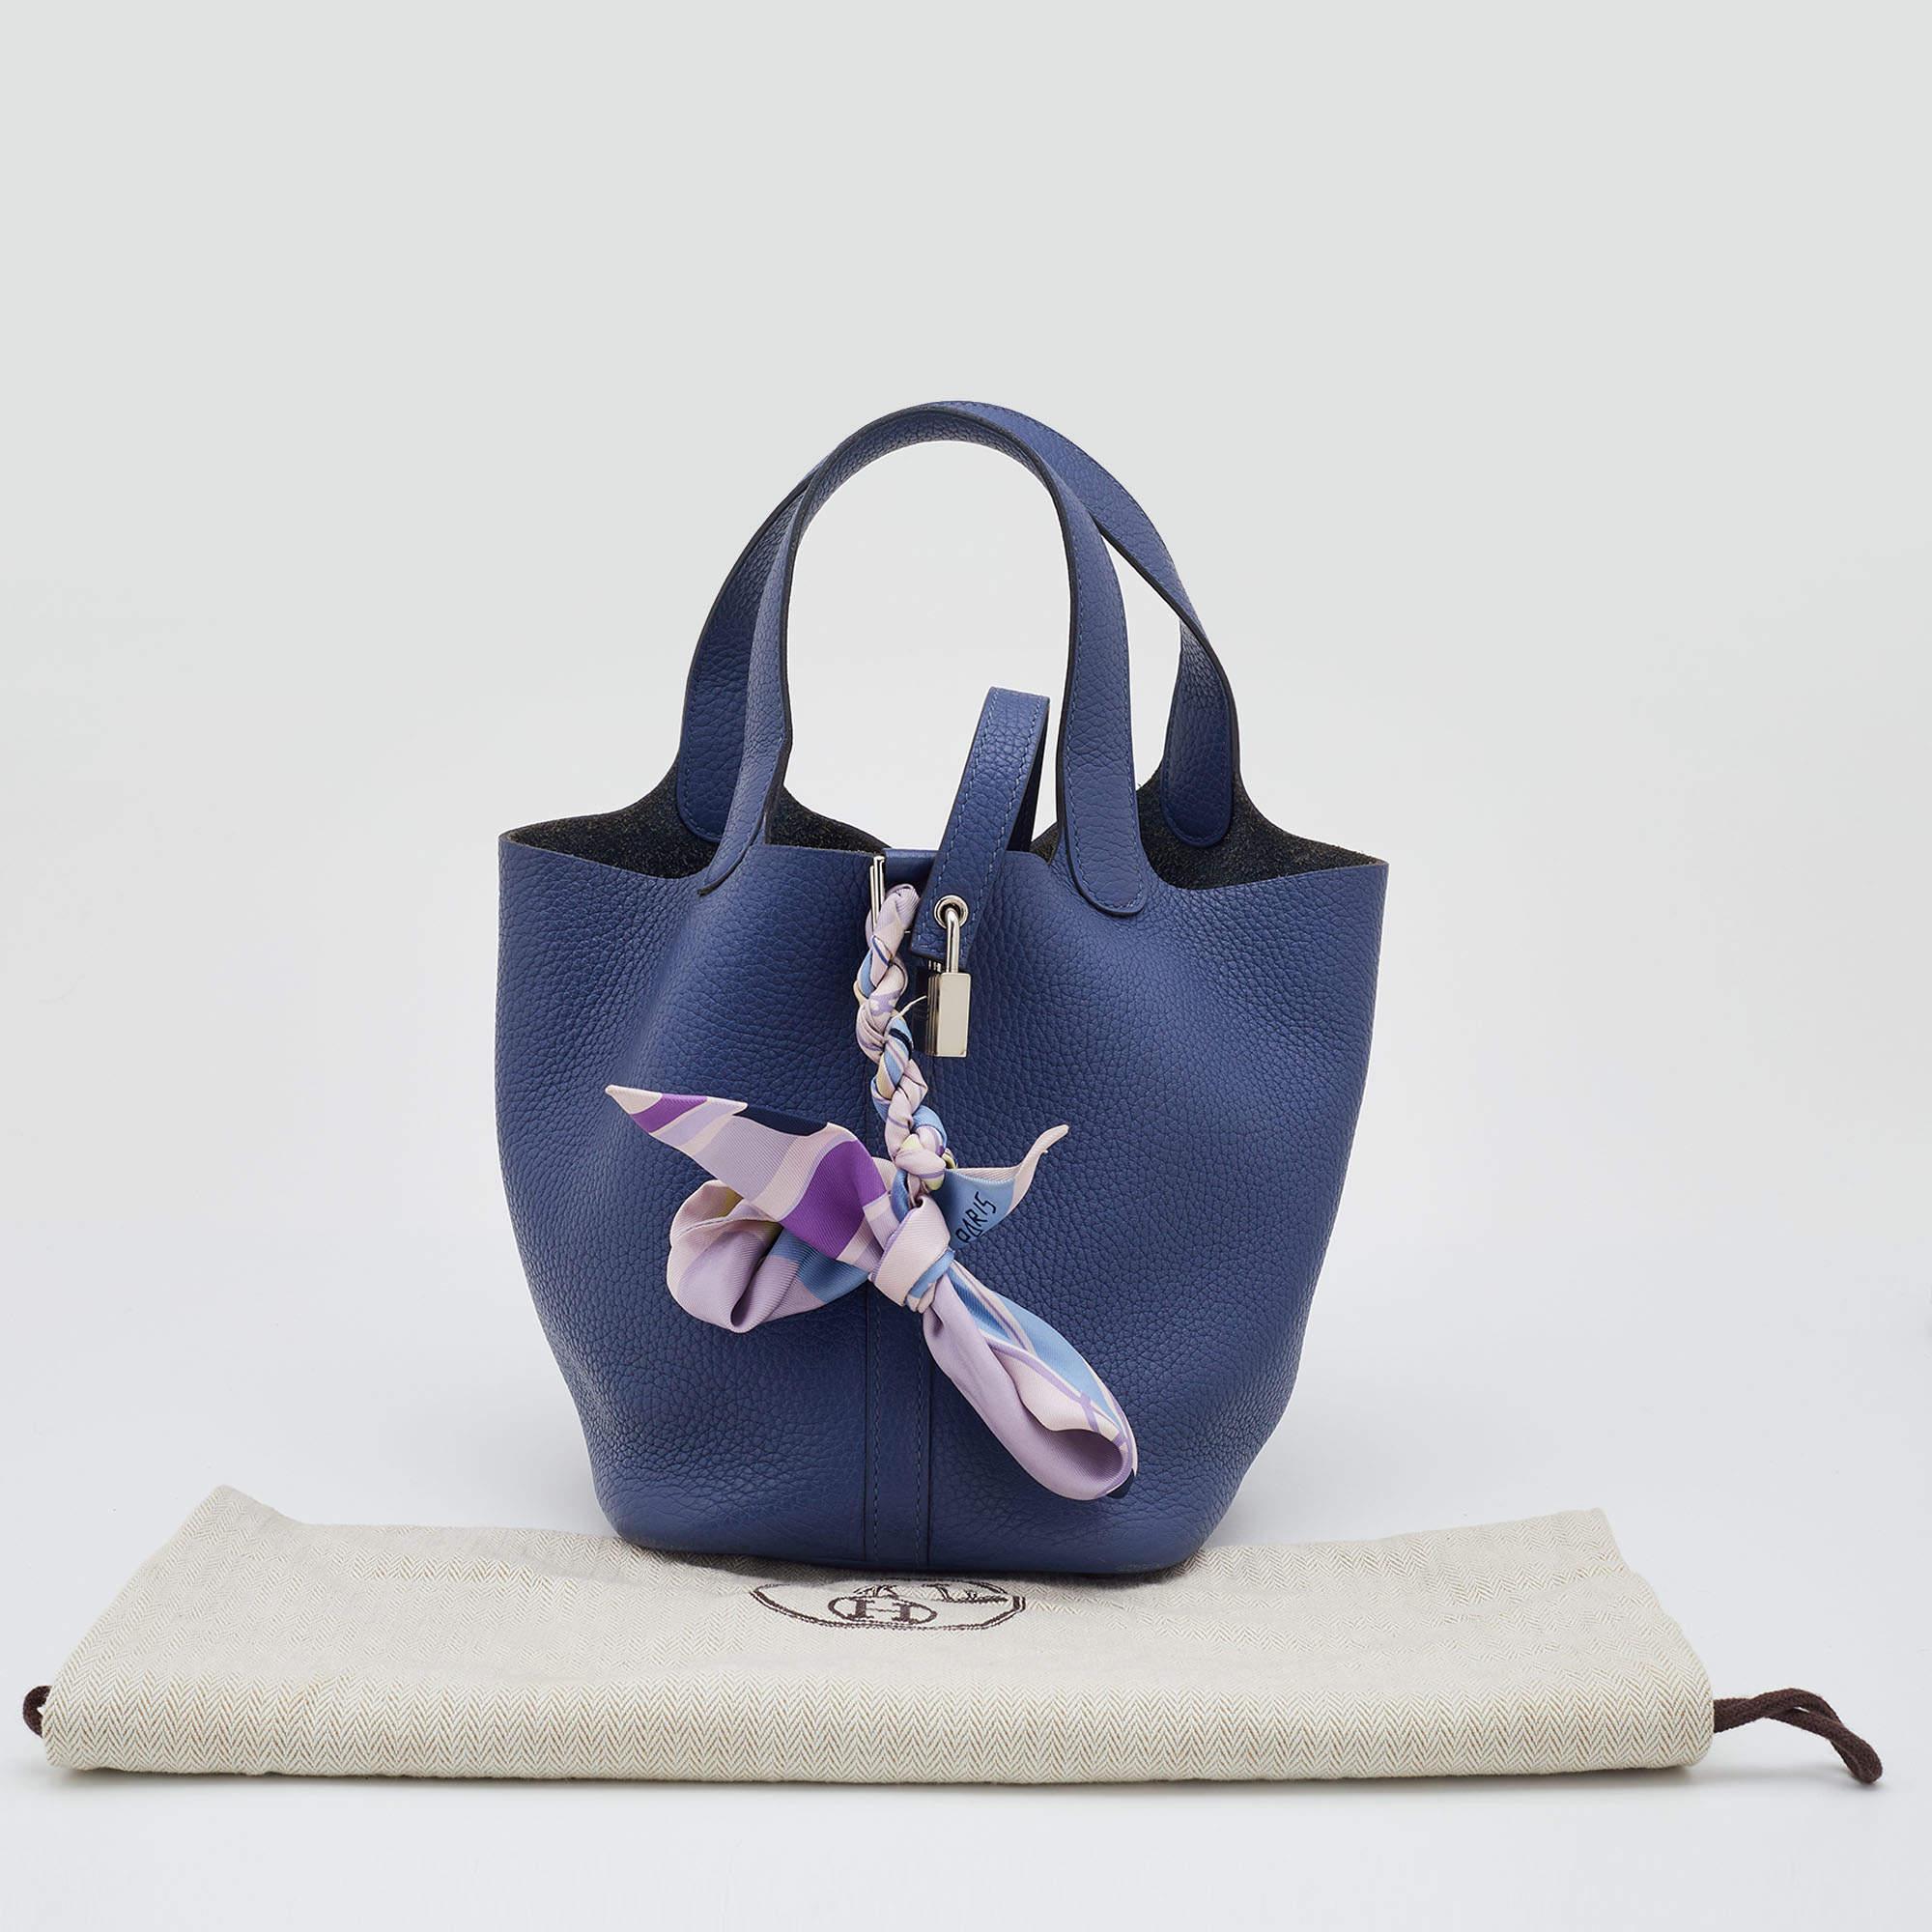 Hermes Blue Agate Taurillion Clemence Leather Picotin Lock 18 Bag 8